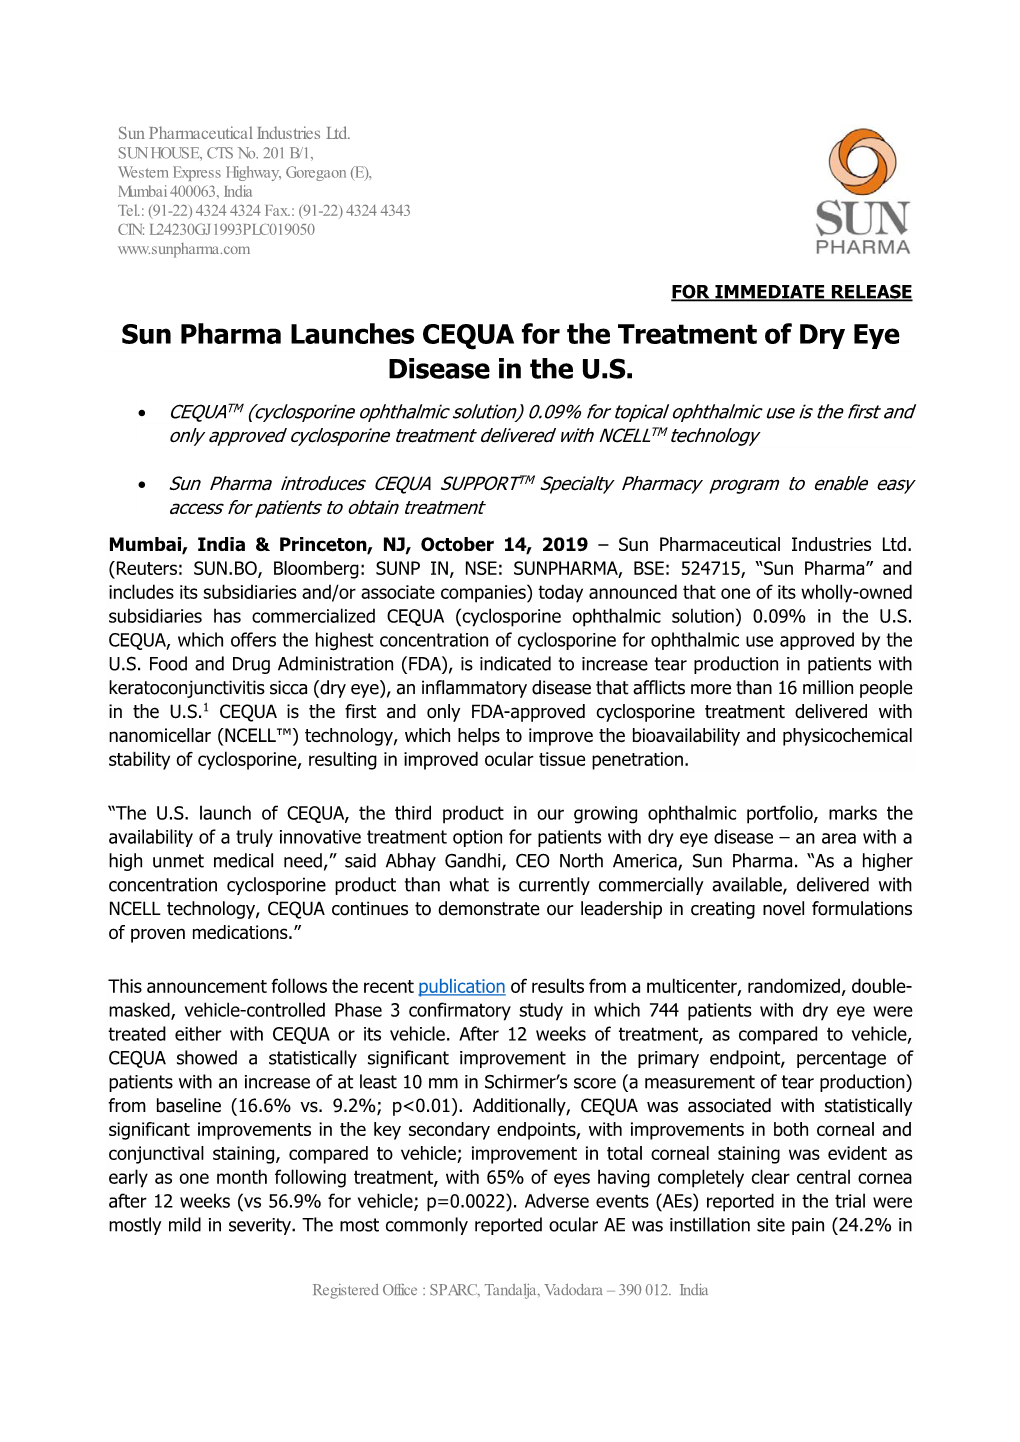 Sun Pharma Launches CEQUA for the Treatment of Dry Eye Disease in the U.S